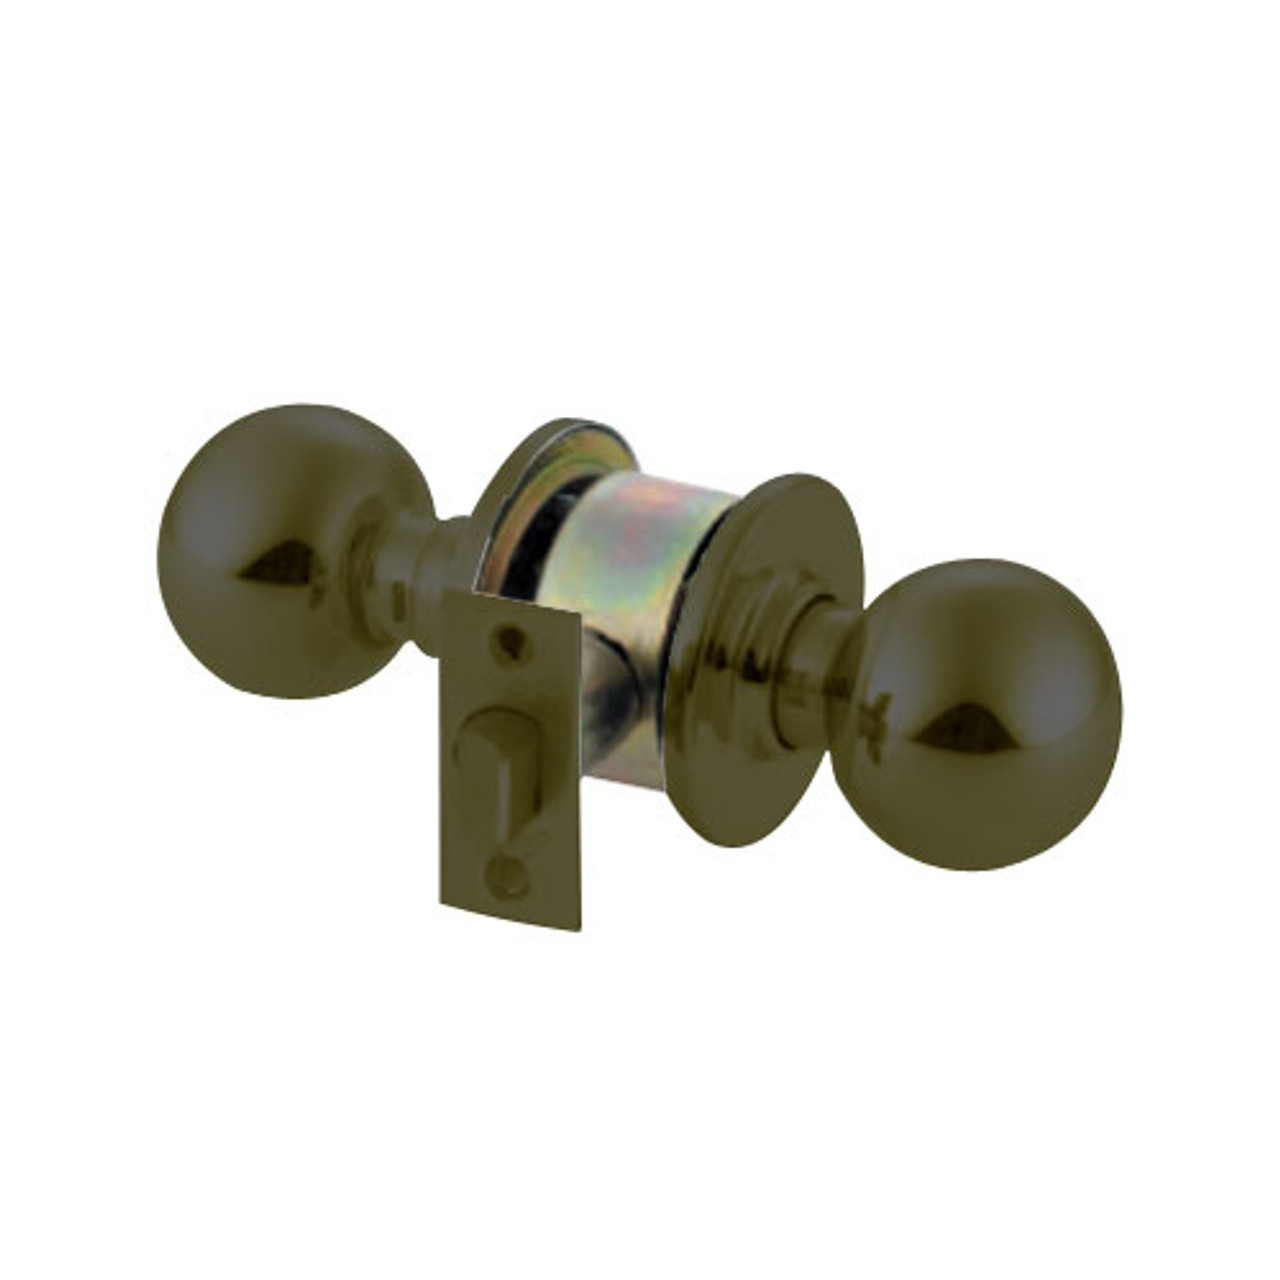 MK03-BD-10B Arrow Lock MK Series Non Keyed Cylindrical Locksets for Communicating Passage with BD Knob in Oil Rubbed Bronze Finish